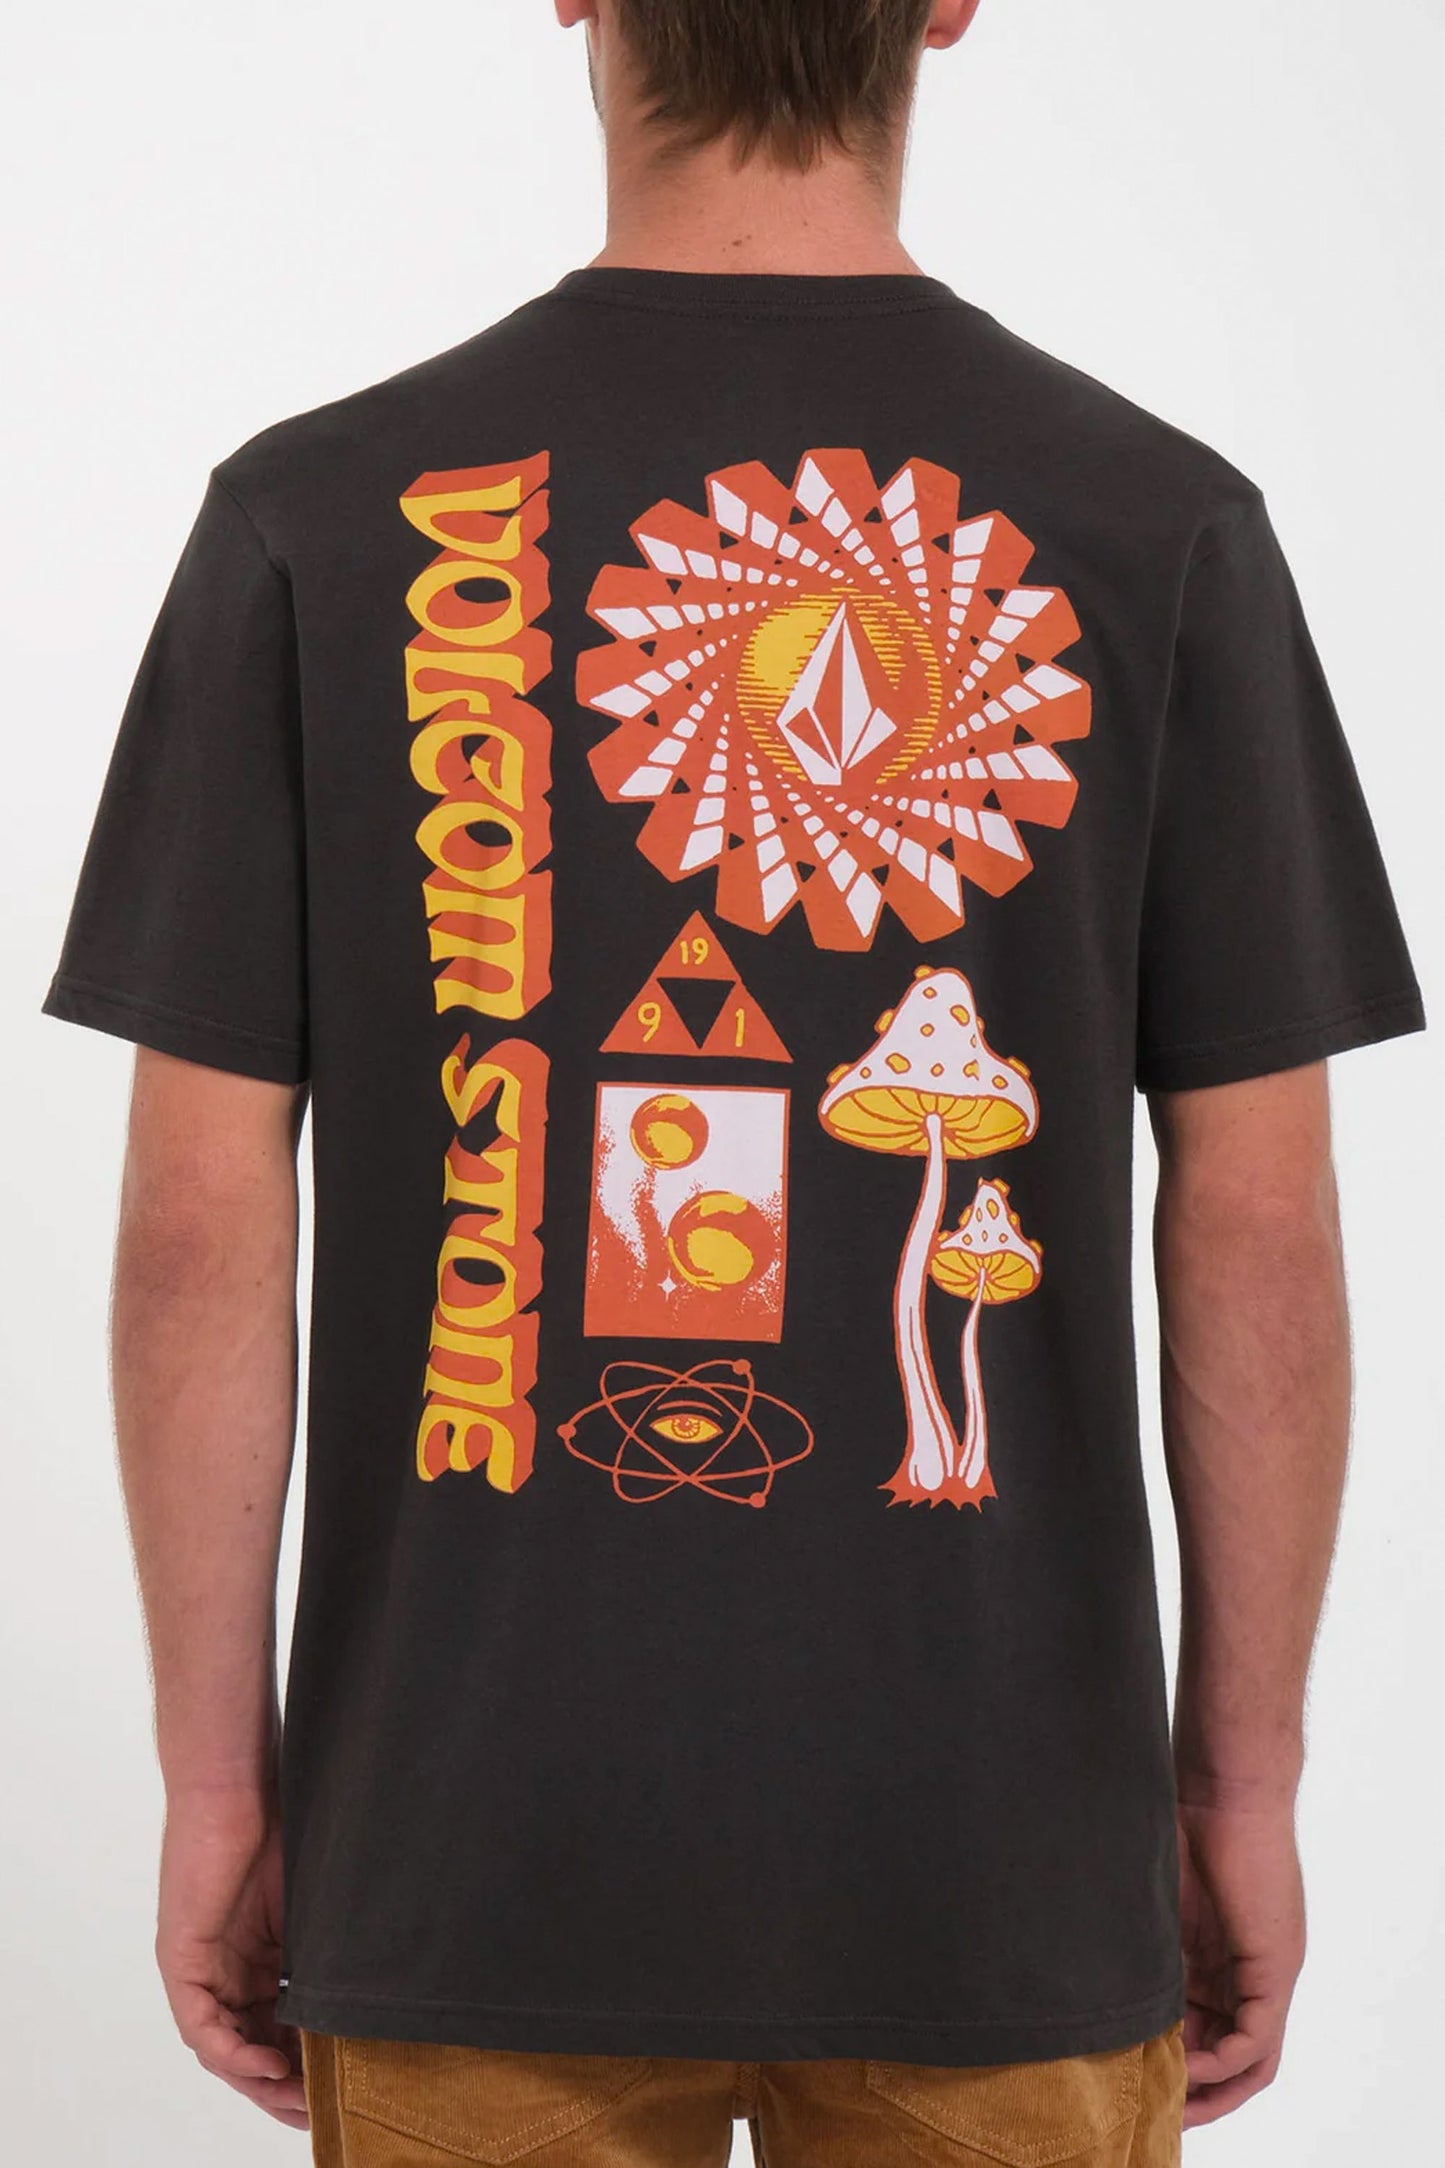 Pukas-Surf-Shop-Volcom-Tee-Fty-Molchat-Stealth